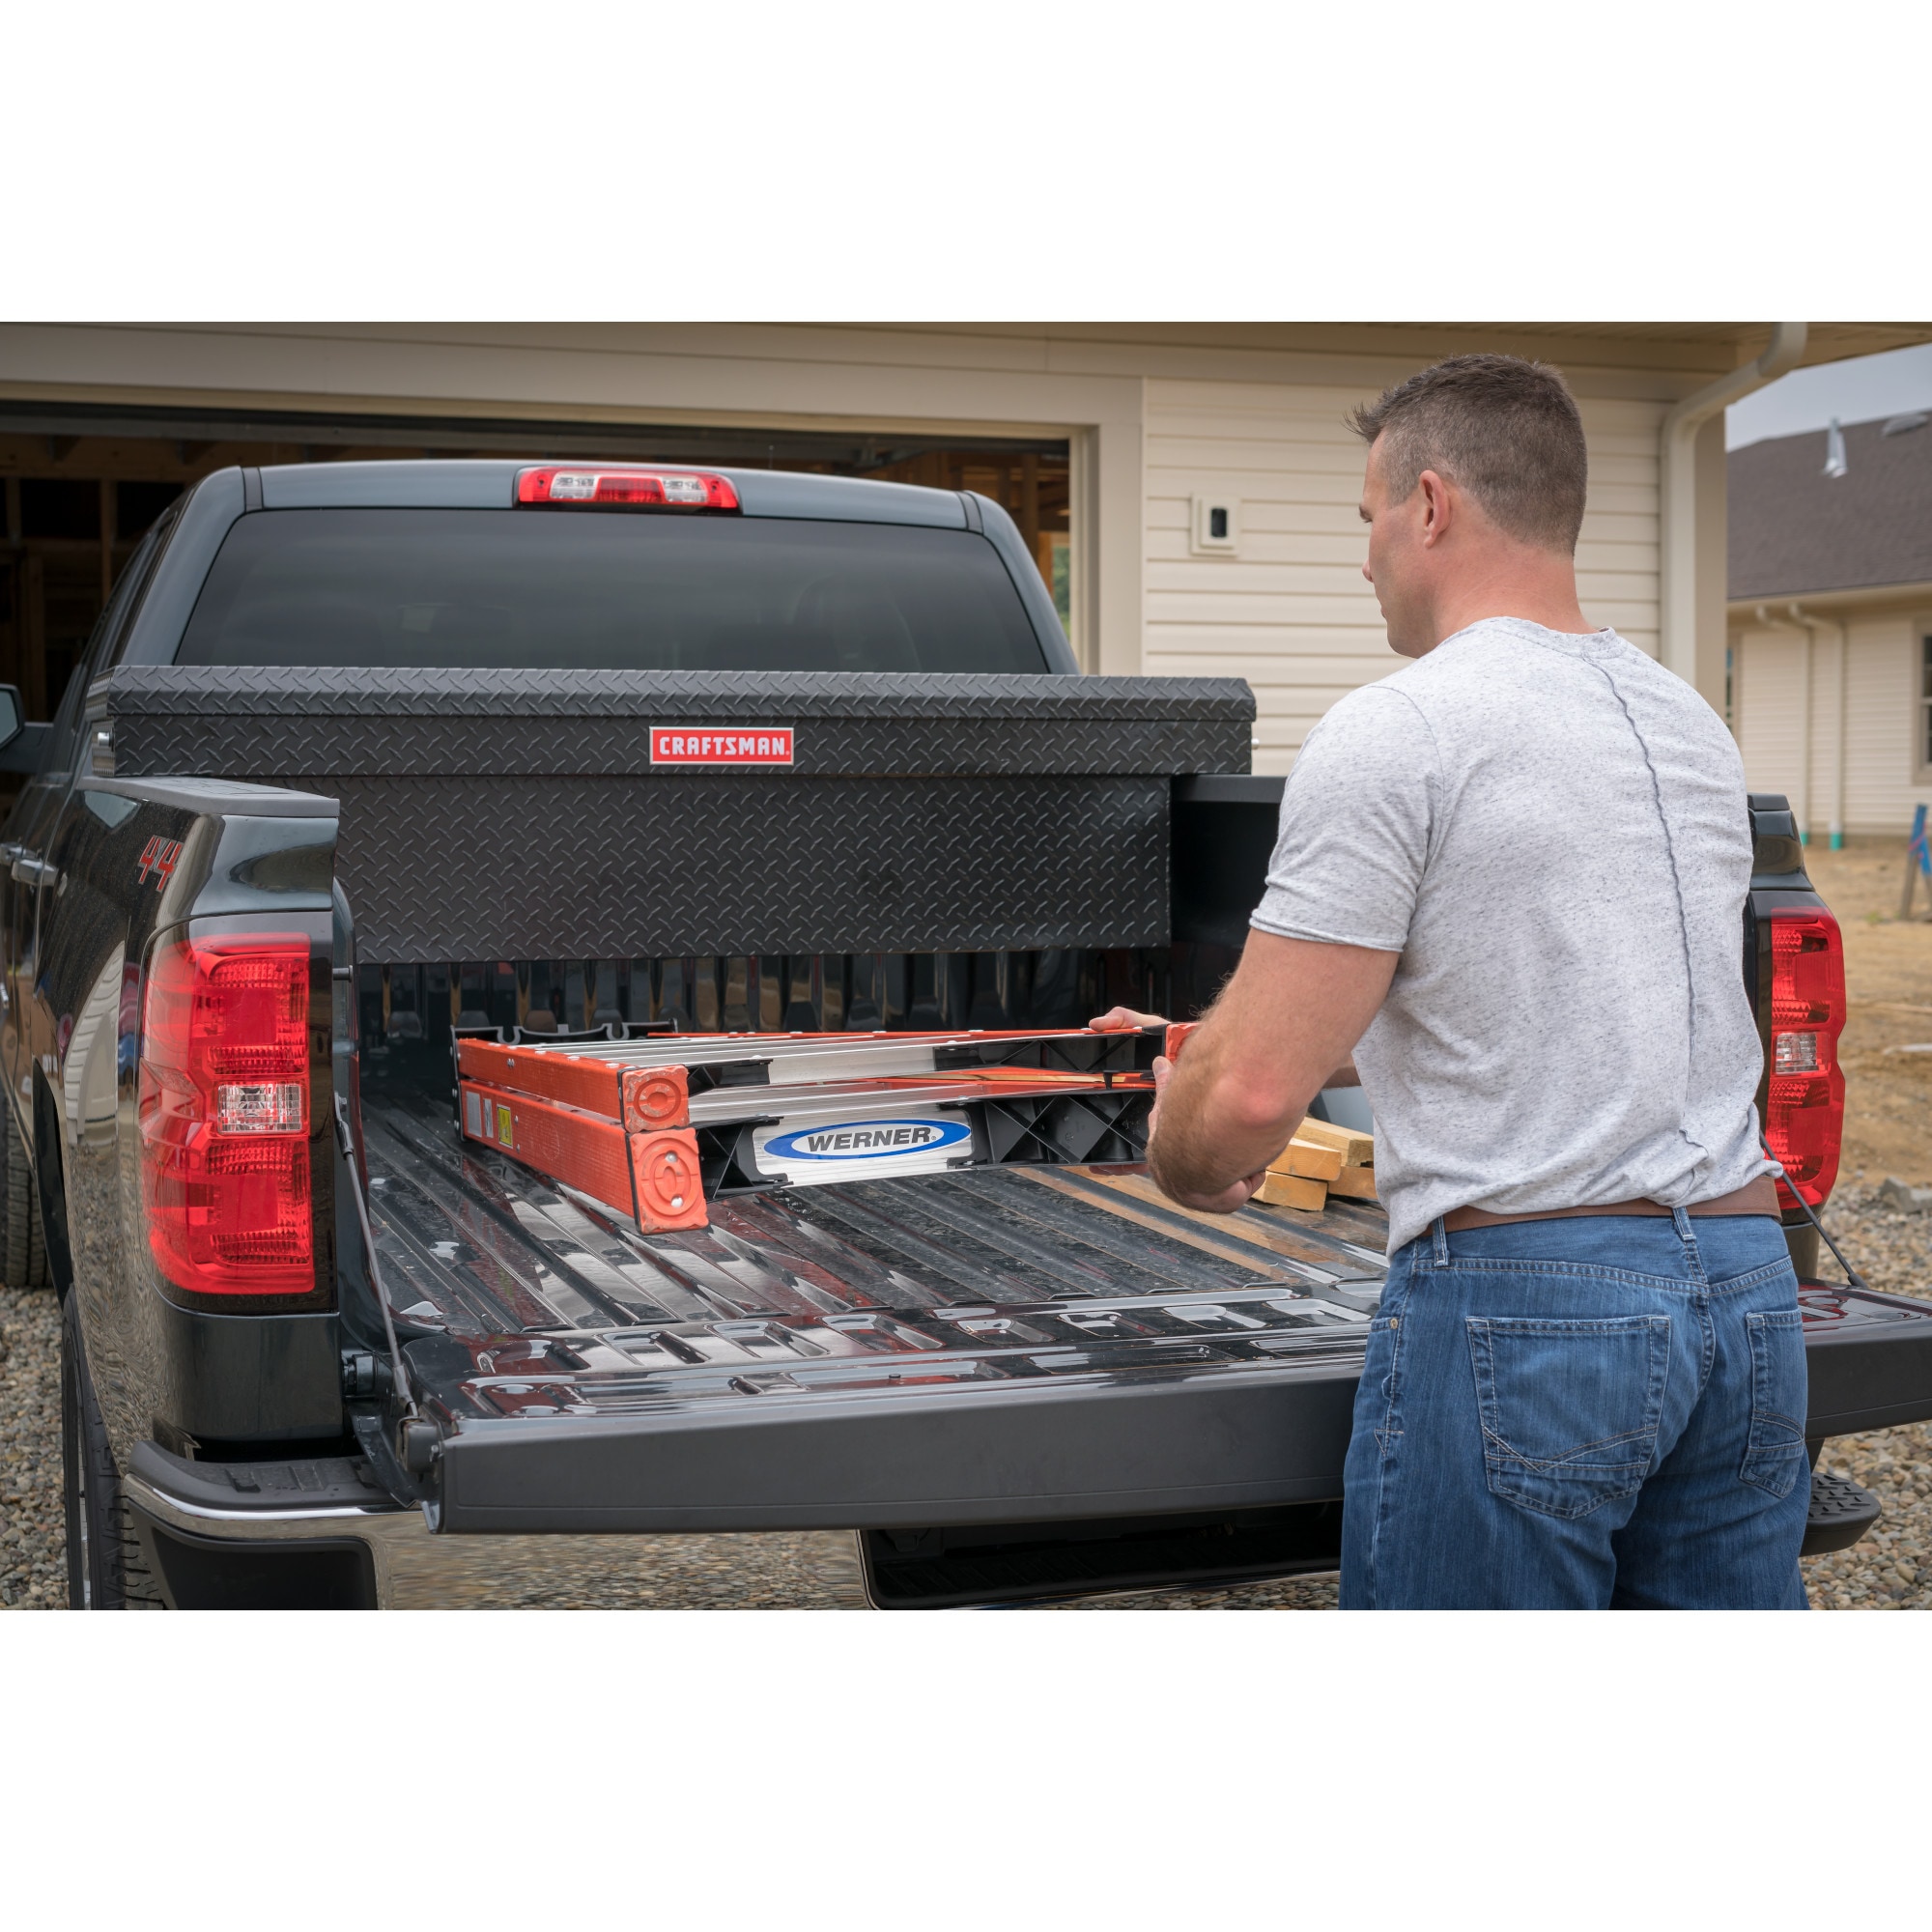 CRAFTSMAN Black Plastic 3-Pocket Truck Box Tray, Fits 20-Inch Crossover  Truck Tool Box, Easy Install & Clean